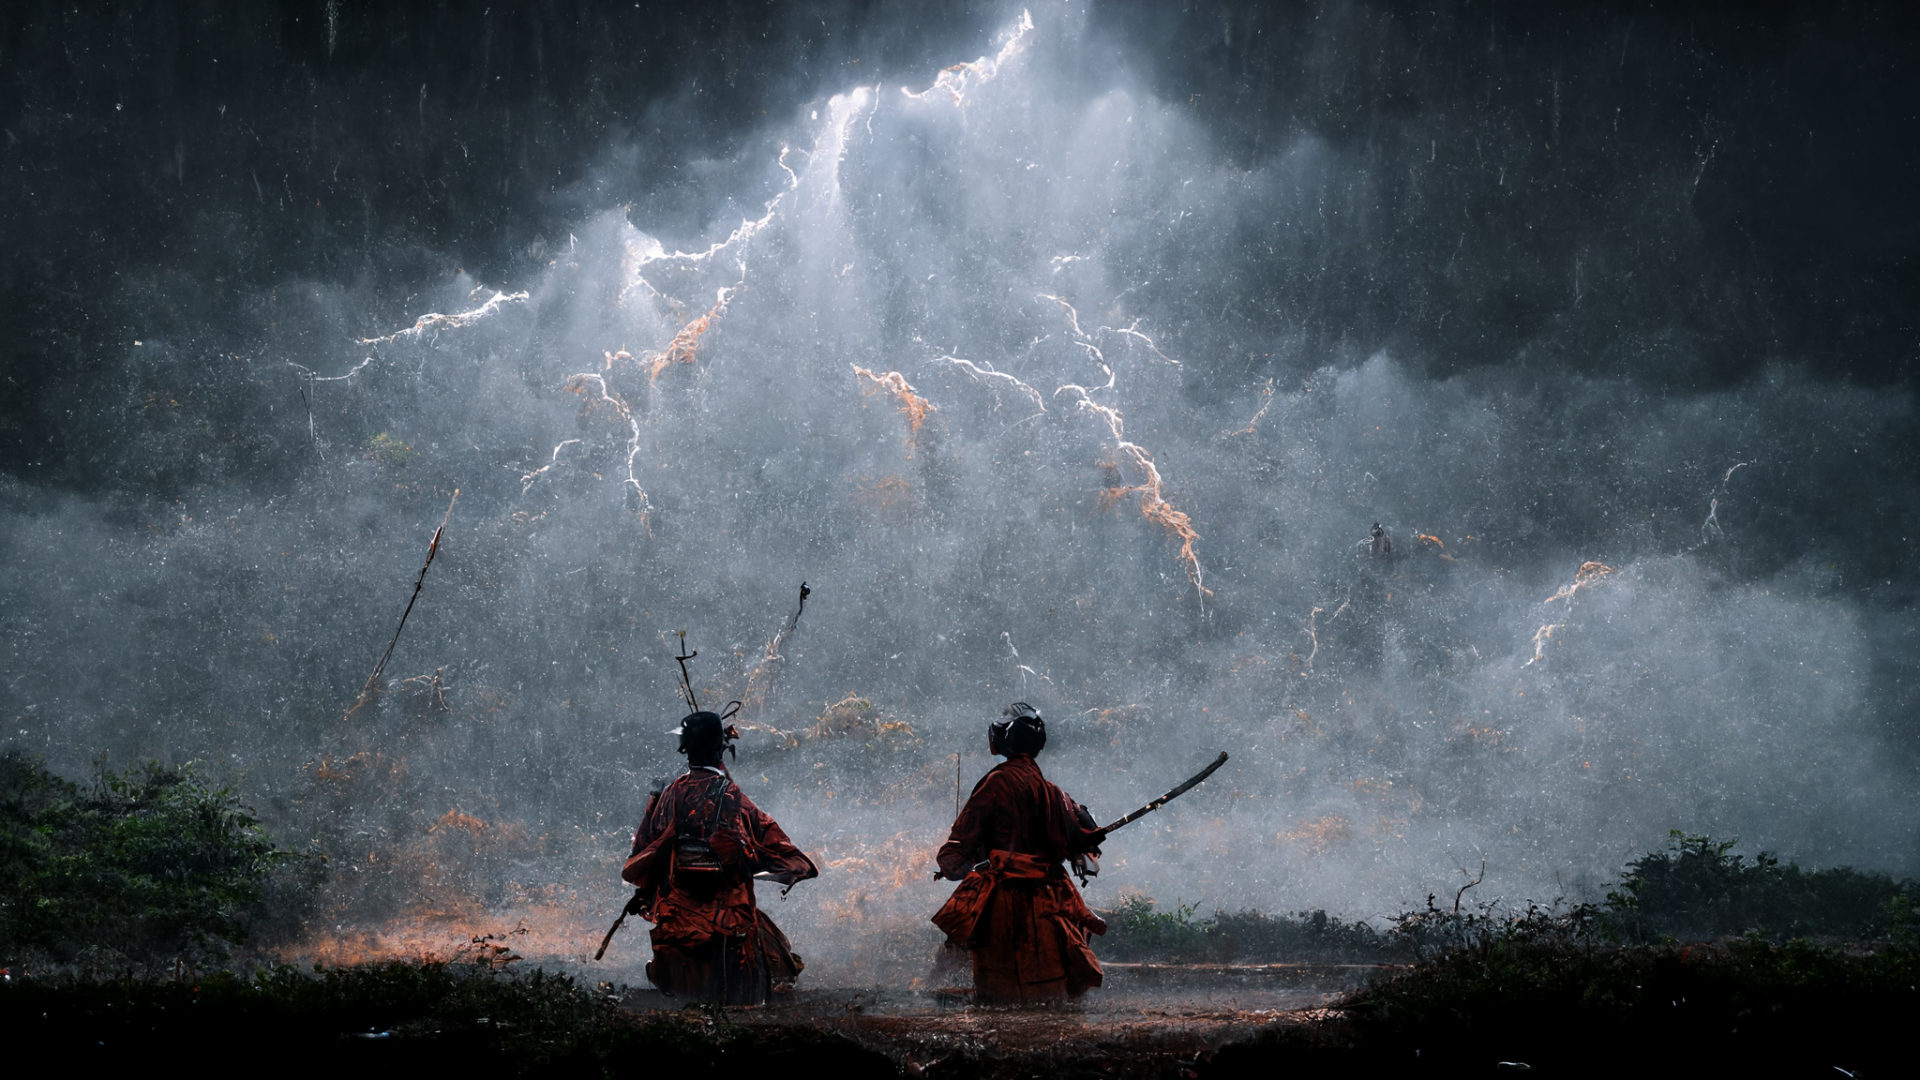 A3_two_samurai_fightingover_the_hillrainy_weatherlightning_flas_c21d5ac6-a98c-42a4-ae4f-188a7f...png